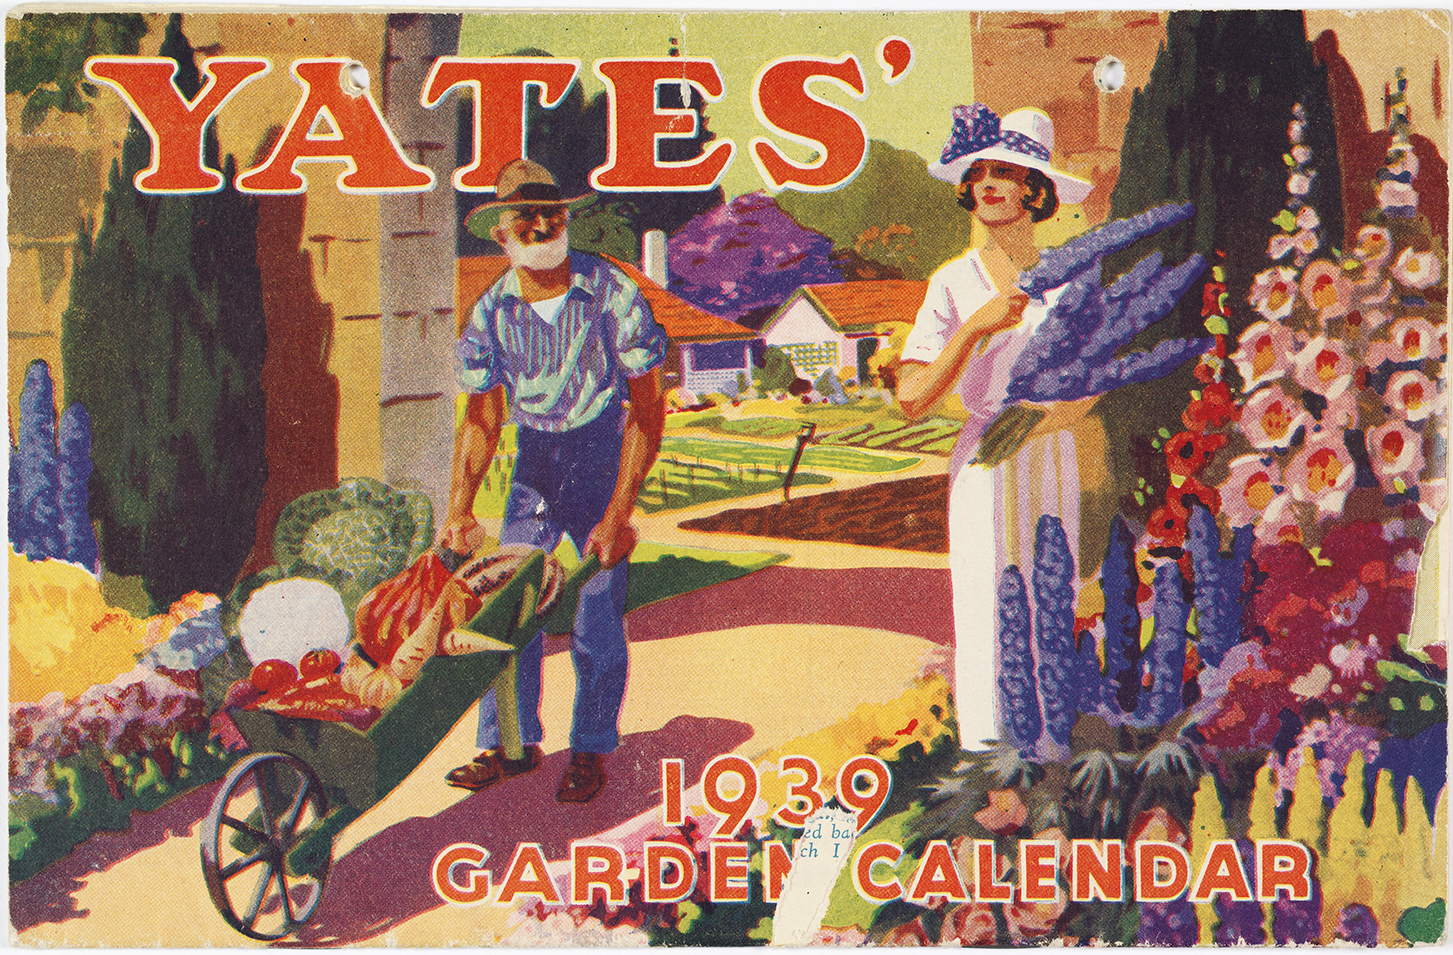 1939 Calendar cover depicting a colourful oil painting of a man and woman in a garden.